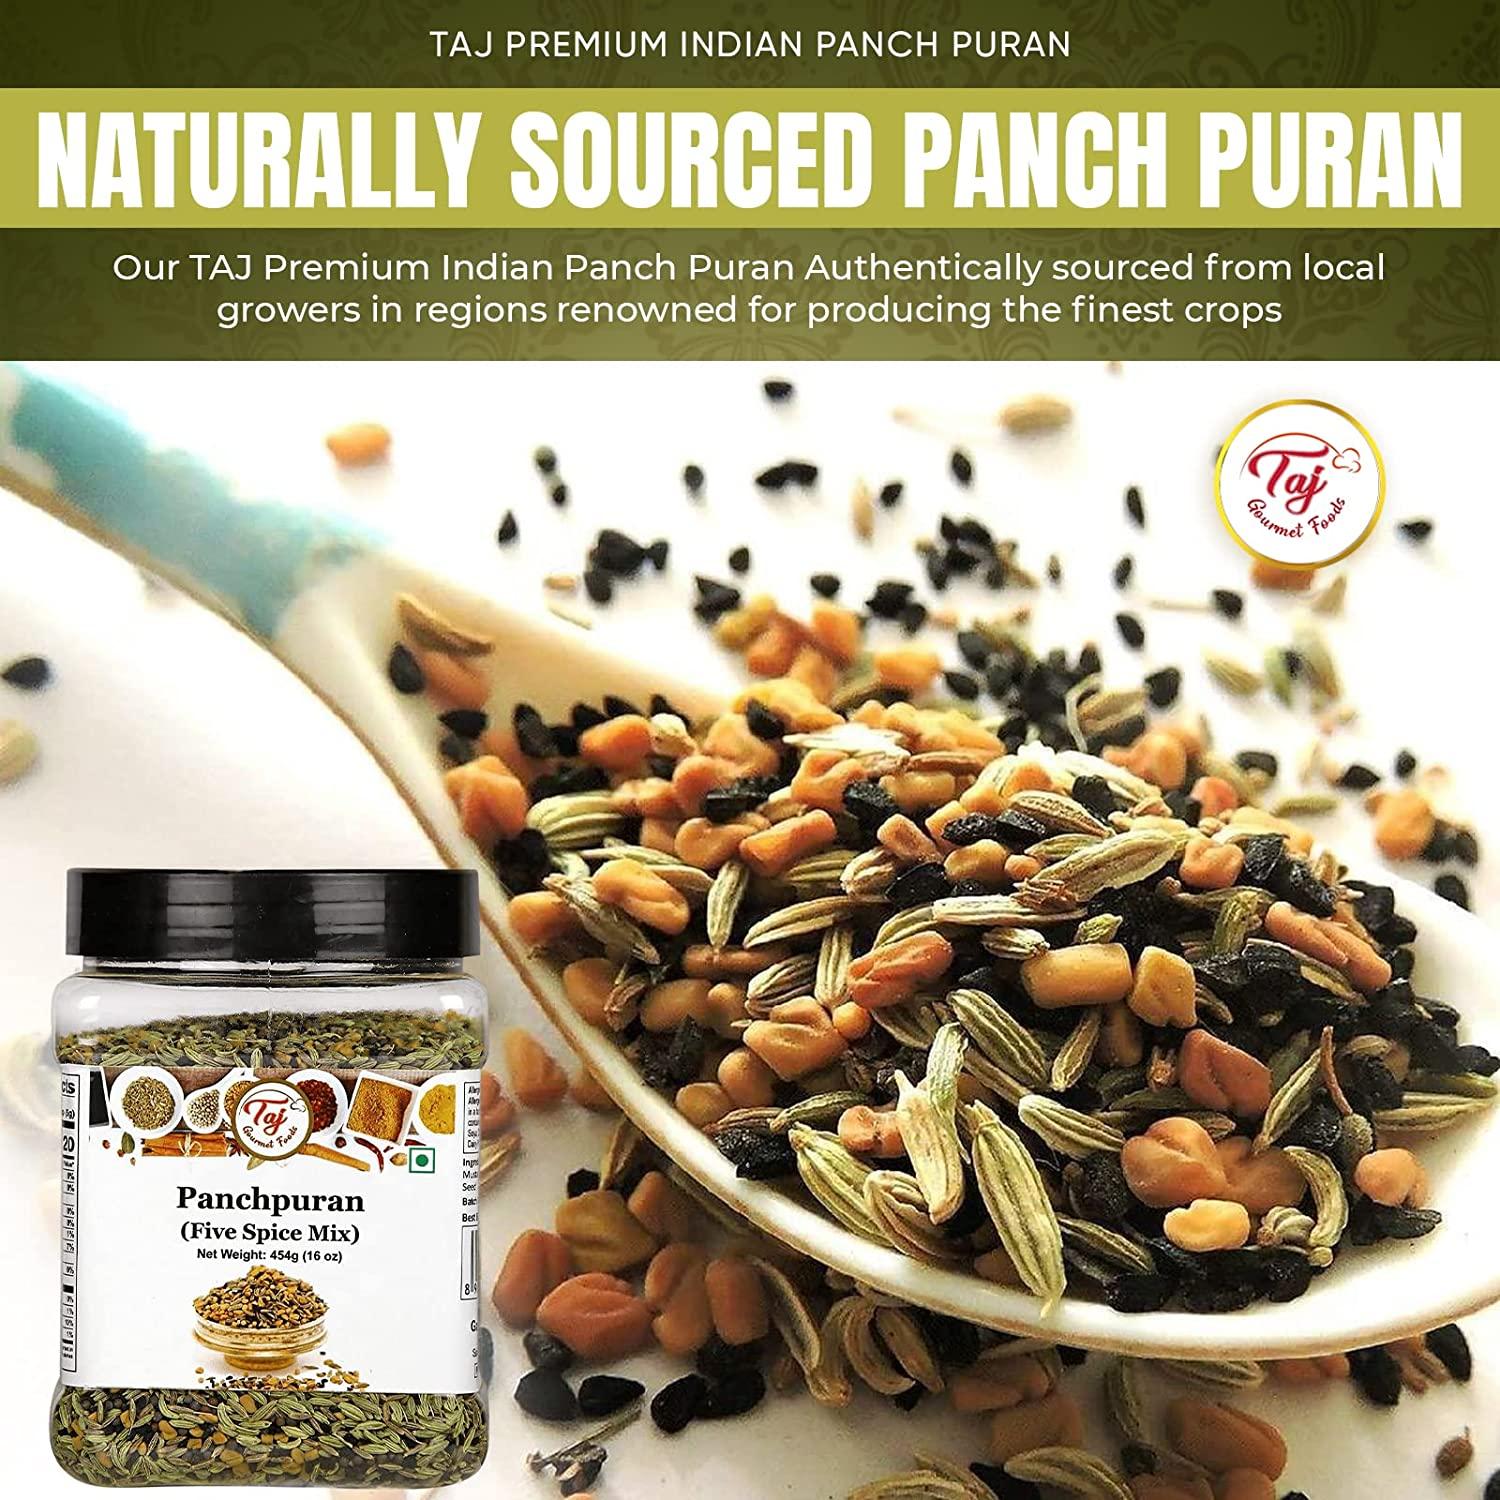 Indian Five Spice (Panch Phoran) – Colonel De Gourmet Herbs & Spices